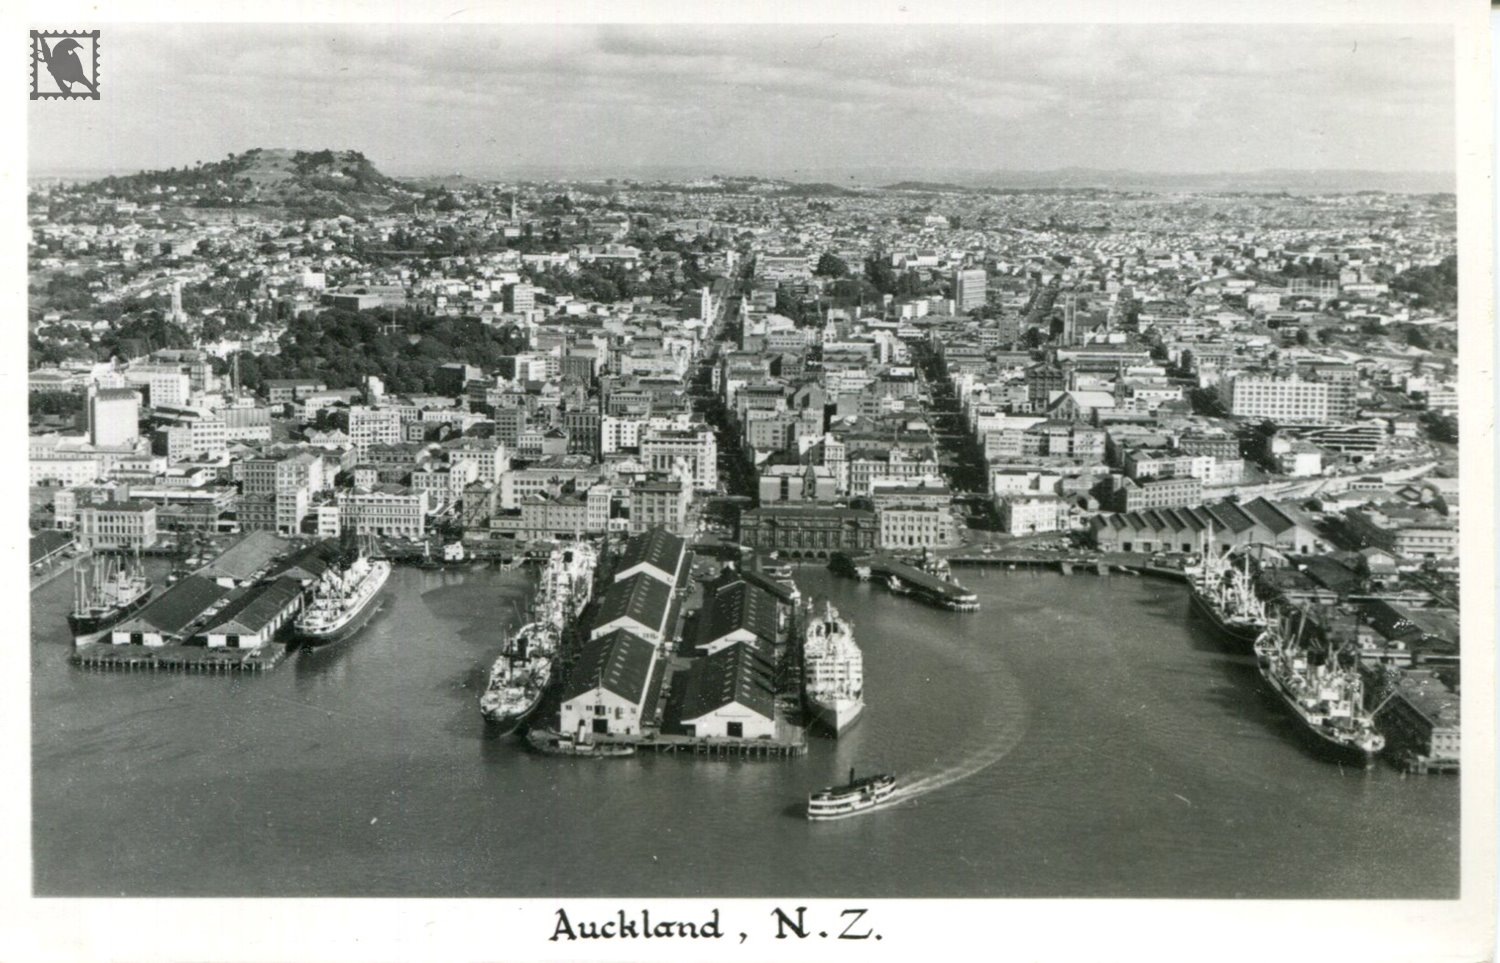 A waterfront aerial view of the wharves